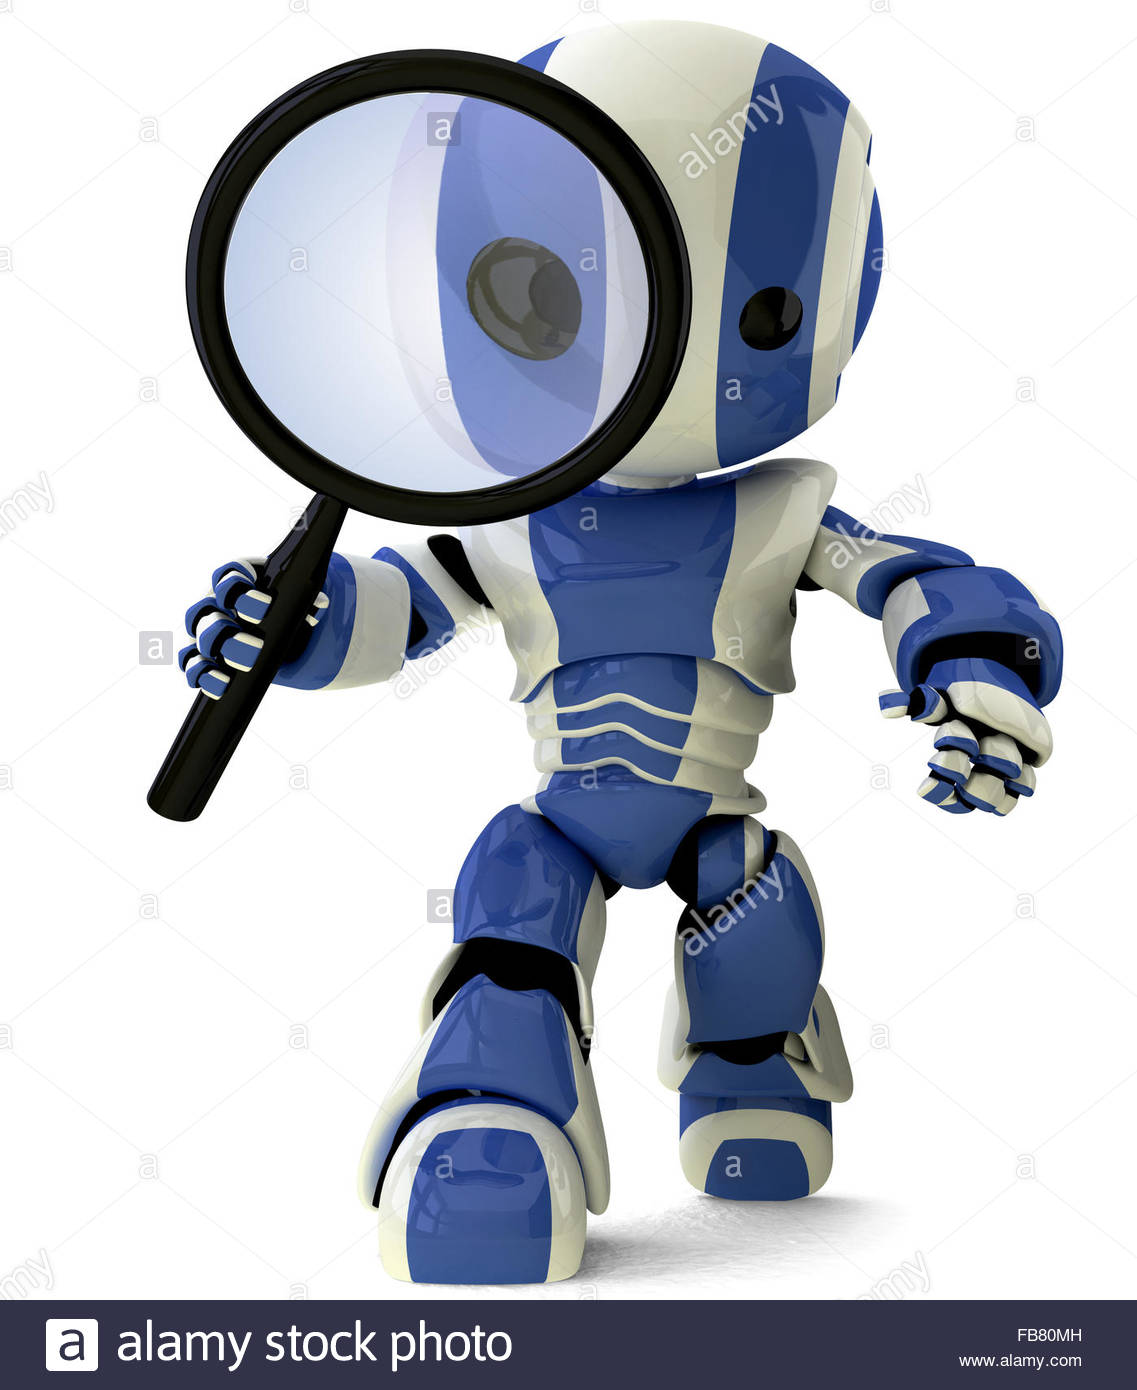 Search alamy All images Search alamy A glossy robot with a magnifying glass inspecting something. A fun concept in programming and search engine optimization.